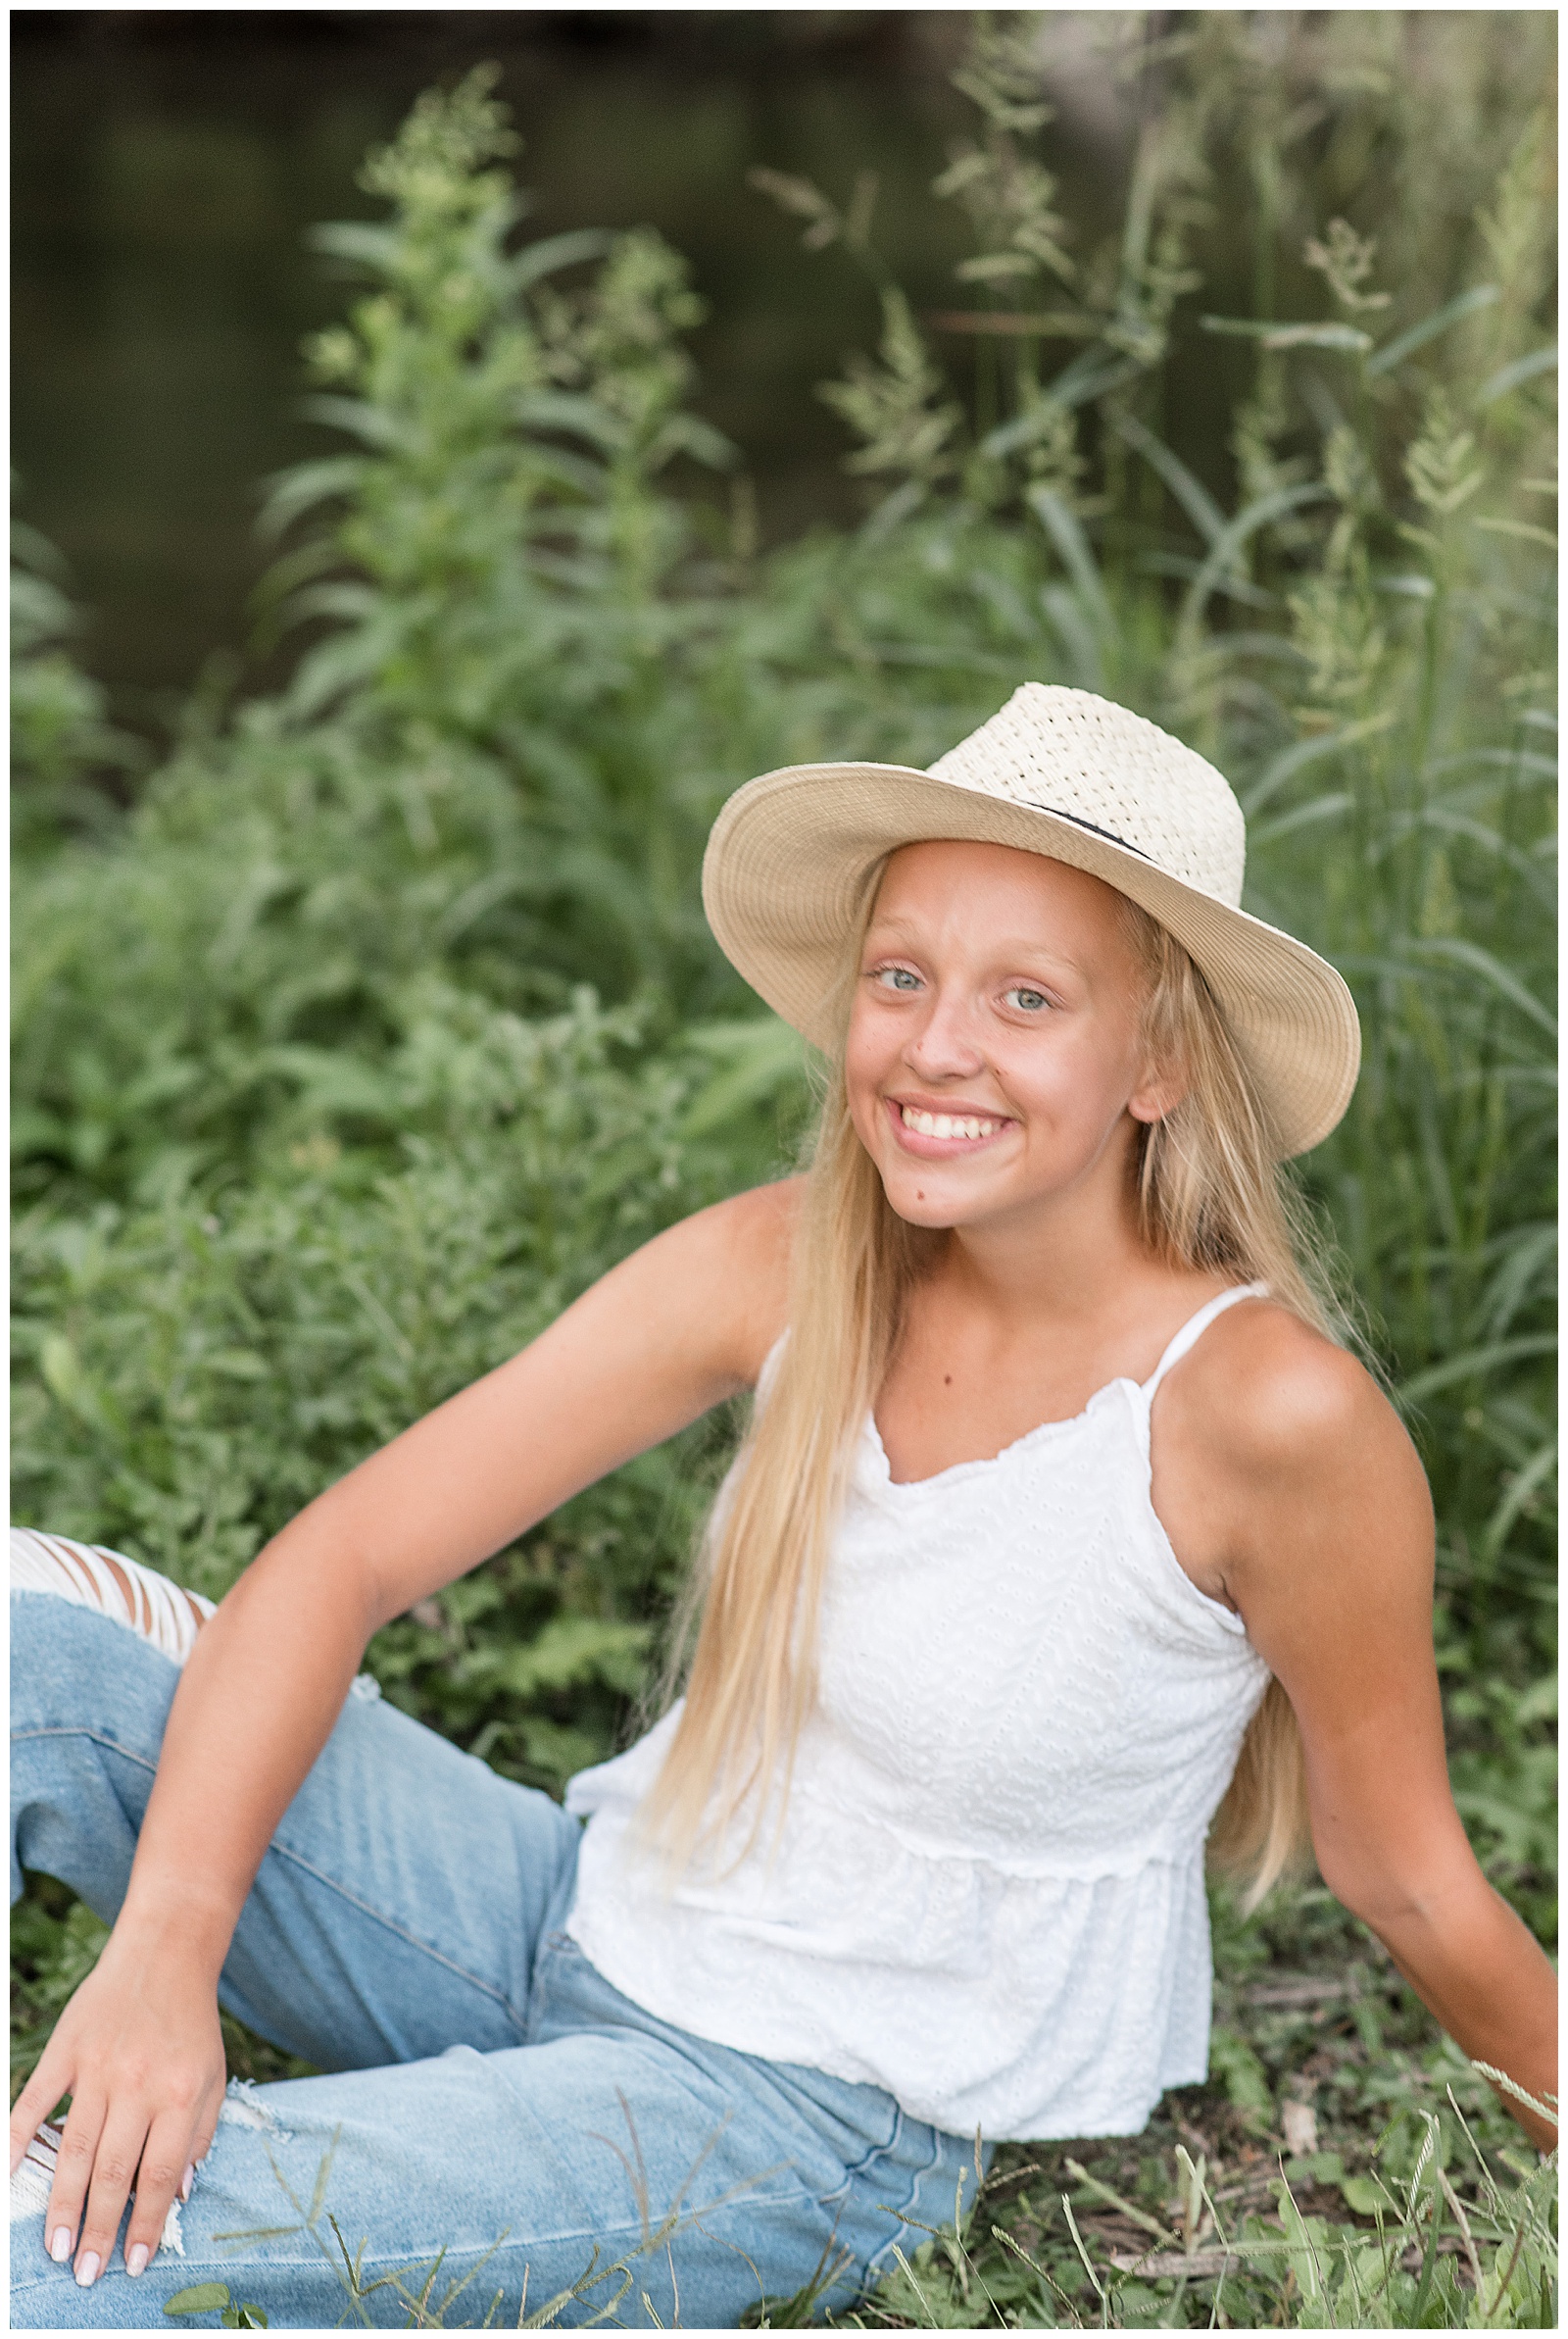 closeup photo of senior girl sitting in grass smiling wearing cute hat with green plants behind her in mechanicsburg pennsylvania